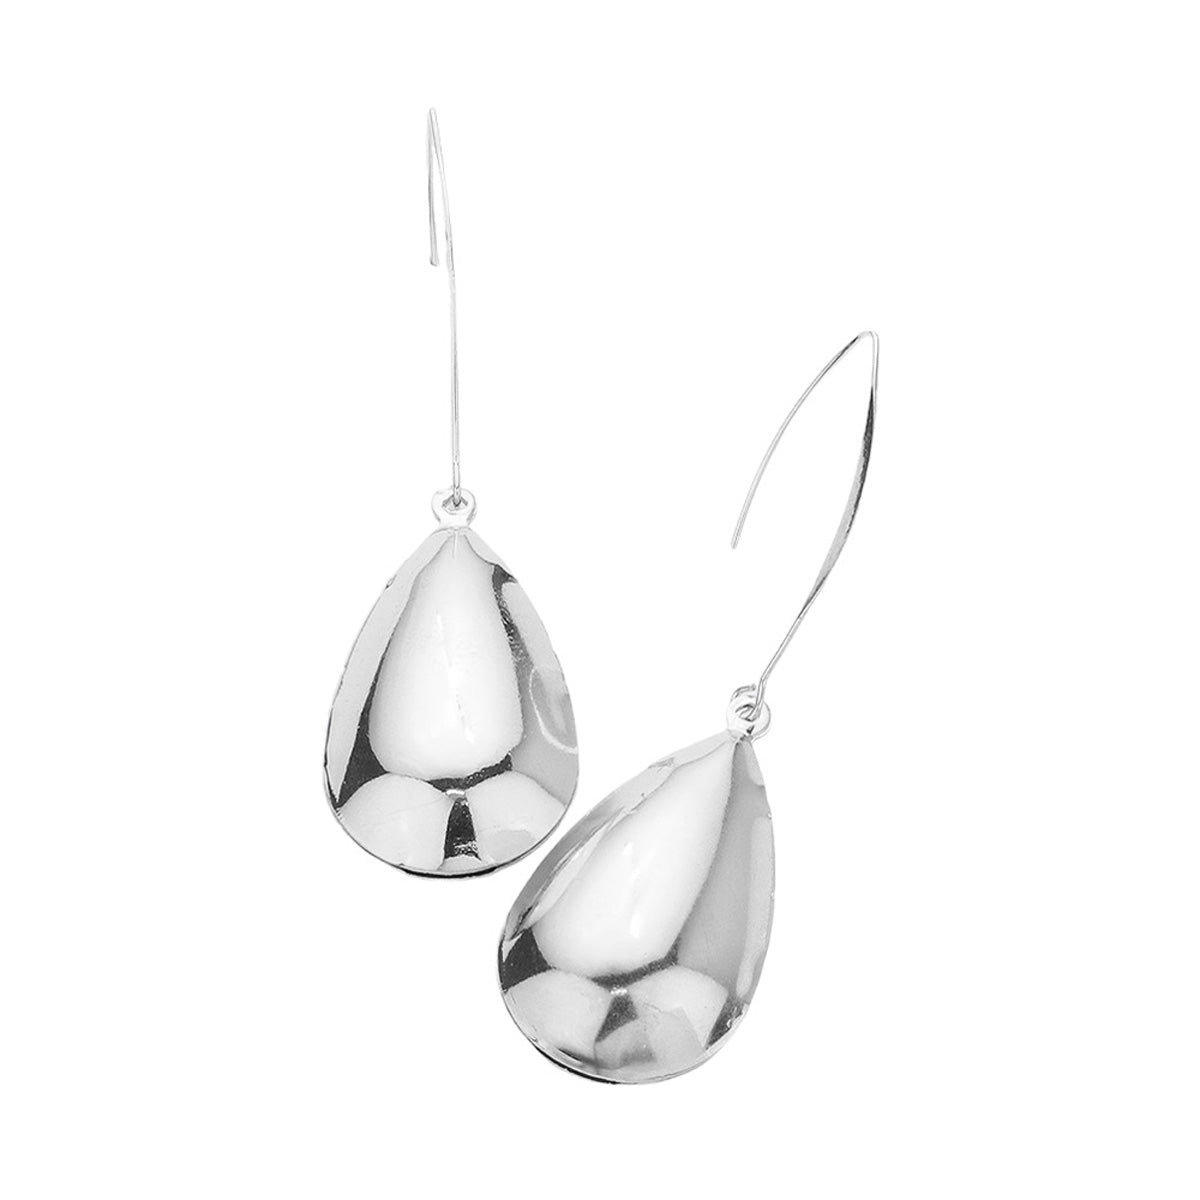 Gold 3D Teardrop Dangle Earrings. Make a stylish statement with these 3D Dangle Earrings. Crafted from metal in a timeless design, they are sure to become a wardrobe staple. The intricate design will draw attention to your face without the need for further adornment.  Perfect gift for birthdays, Mother's Day, Graduation.